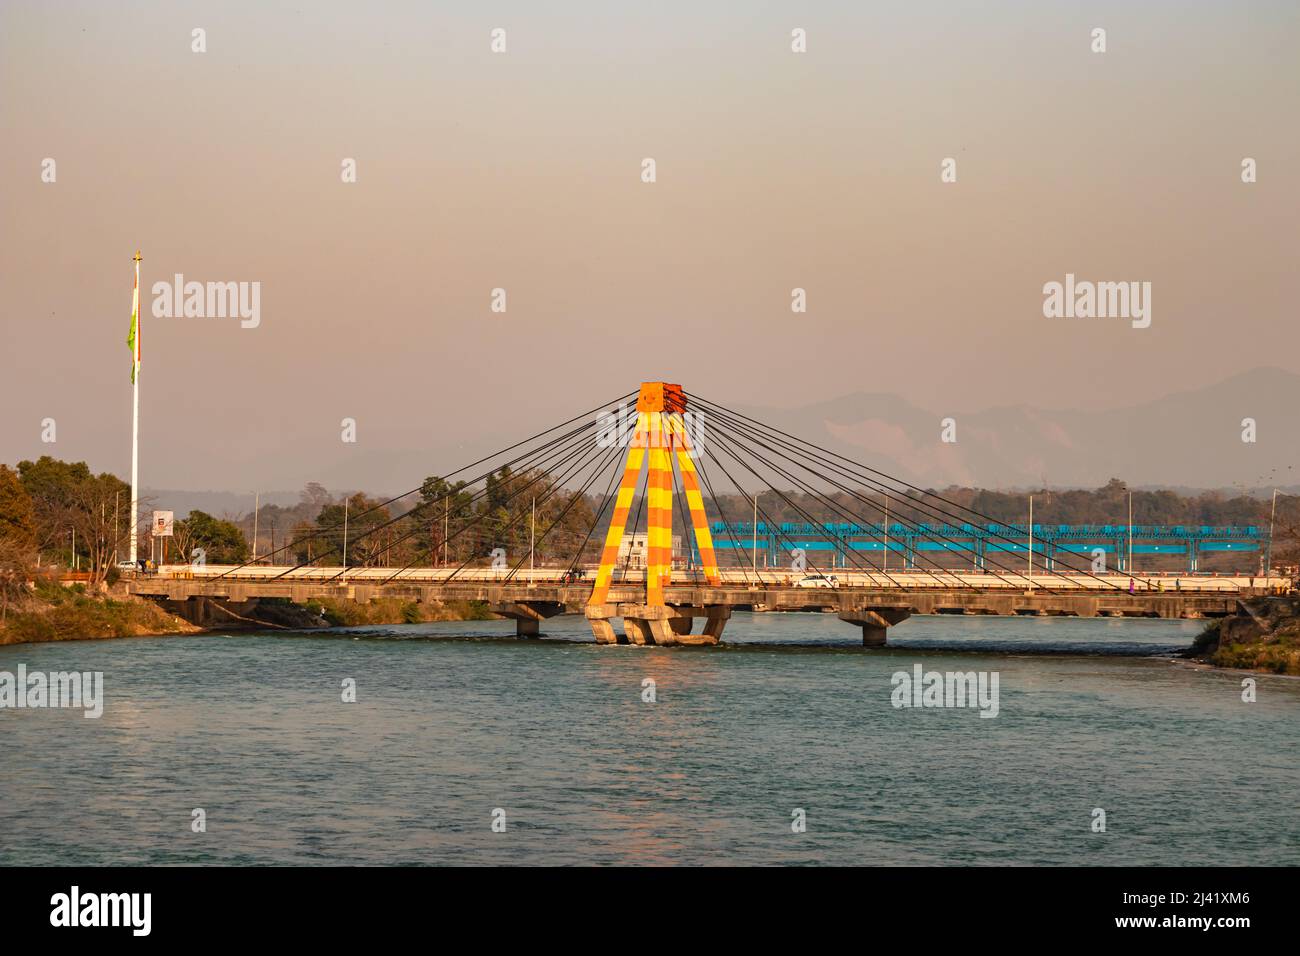 isolated cable bridge over ganges river at evening image is taken at haridwar uttrakhand india. Stock Photo